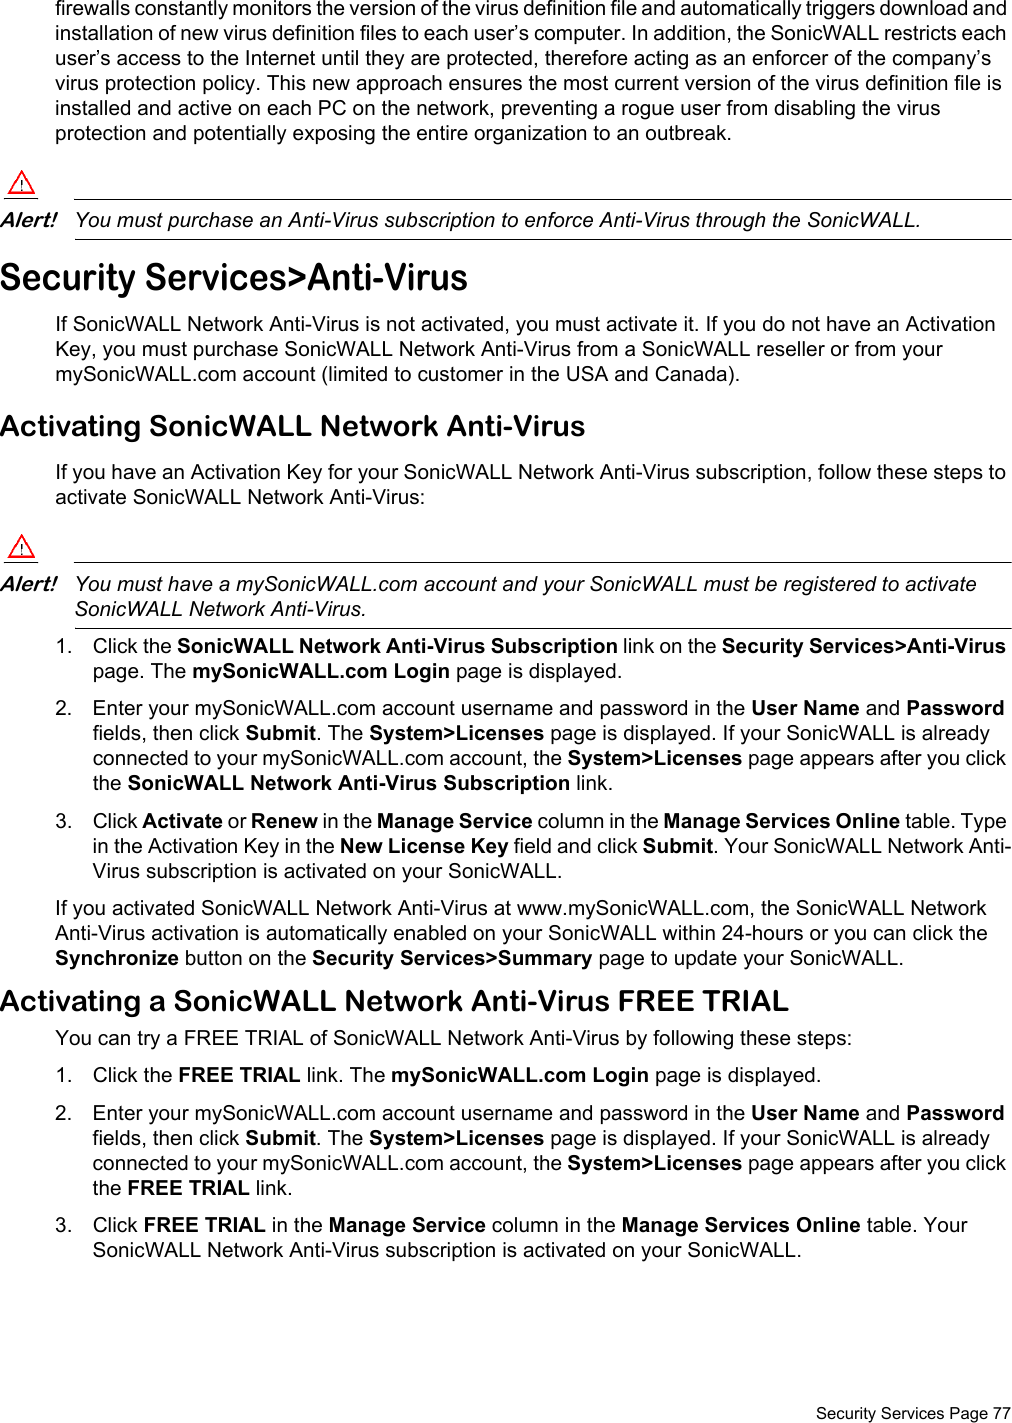  Security Services Page 77firewalls constantly monitors the version of the virus definition file and automatically triggers download and installation of new virus definition files to each user’s computer. In addition, the SonicWALL restricts each user’s access to the Internet until they are protected, therefore acting as an enforcer of the company’s virus protection policy. This new approach ensures the most current version of the virus definition file is installed and active on each PC on the network, preventing a rogue user from disabling the virus protection and potentially exposing the entire organization to an outbreak.Alert!You must purchase an Anti-Virus subscription to enforce Anti-Virus through the SonicWALL.Security Services&gt;Anti-VirusIf SonicWALL Network Anti-Virus is not activated, you must activate it. If you do not have an Activation Key, you must purchase SonicWALL Network Anti-Virus from a SonicWALL reseller or from your mySonicWALL.com account (limited to customer in the USA and Canada).Activating SonicWALL Network Anti-VirusIf you have an Activation Key for your SonicWALL Network Anti-Virus subscription, follow these steps to activate SonicWALL Network Anti-Virus:Alert!You must have a mySonicWALL.com account and your SonicWALL must be registered to activate SonicWALL Network Anti-Virus.1. Click the SonicWALL Network Anti-Virus Subscription link on the Security Services&gt;Anti-Virus page. The mySonicWALL.com Login page is displayed. 2. Enter your mySonicWALL.com account username and password in the User Name and Password fields, then click Submit. The System&gt;Licenses page is displayed. If your SonicWALL is already connected to your mySonicWALL.com account, the System&gt;Licenses page appears after you click the SonicWALL Network Anti-Virus Subscription link. 3. Click Activate or Renew in the Manage Service column in the Manage Services Online table. Type in the Activation Key in the New License Key field and click Submit. Your SonicWALL Network Anti-Virus subscription is activated on your SonicWALL.If you activated SonicWALL Network Anti-Virus at www.mySonicWALL.com, the SonicWALL Network Anti-Virus activation is automatically enabled on your SonicWALL within 24-hours or you can click the Synchronize button on the Security Services&gt;Summary page to update your SonicWALL.Activating a SonicWALL Network Anti-Virus FREE TRIALYou can try a FREE TRIAL of SonicWALL Network Anti-Virus by following these steps:1. Click the FREE TRIAL link. The mySonicWALL.com Login page is displayed. 2. Enter your mySonicWALL.com account username and password in the User Name and Password fields, then click Submit. The System&gt;Licenses page is displayed. If your SonicWALL is already connected to your mySonicWALL.com account, the System&gt;Licenses page appears after you click the FREE TRIAL link.3. Click FREE TRIAL in the Manage Service column in the Manage Services Online table. Your SonicWALL Network Anti-Virus subscription is activated on your SonicWALL.